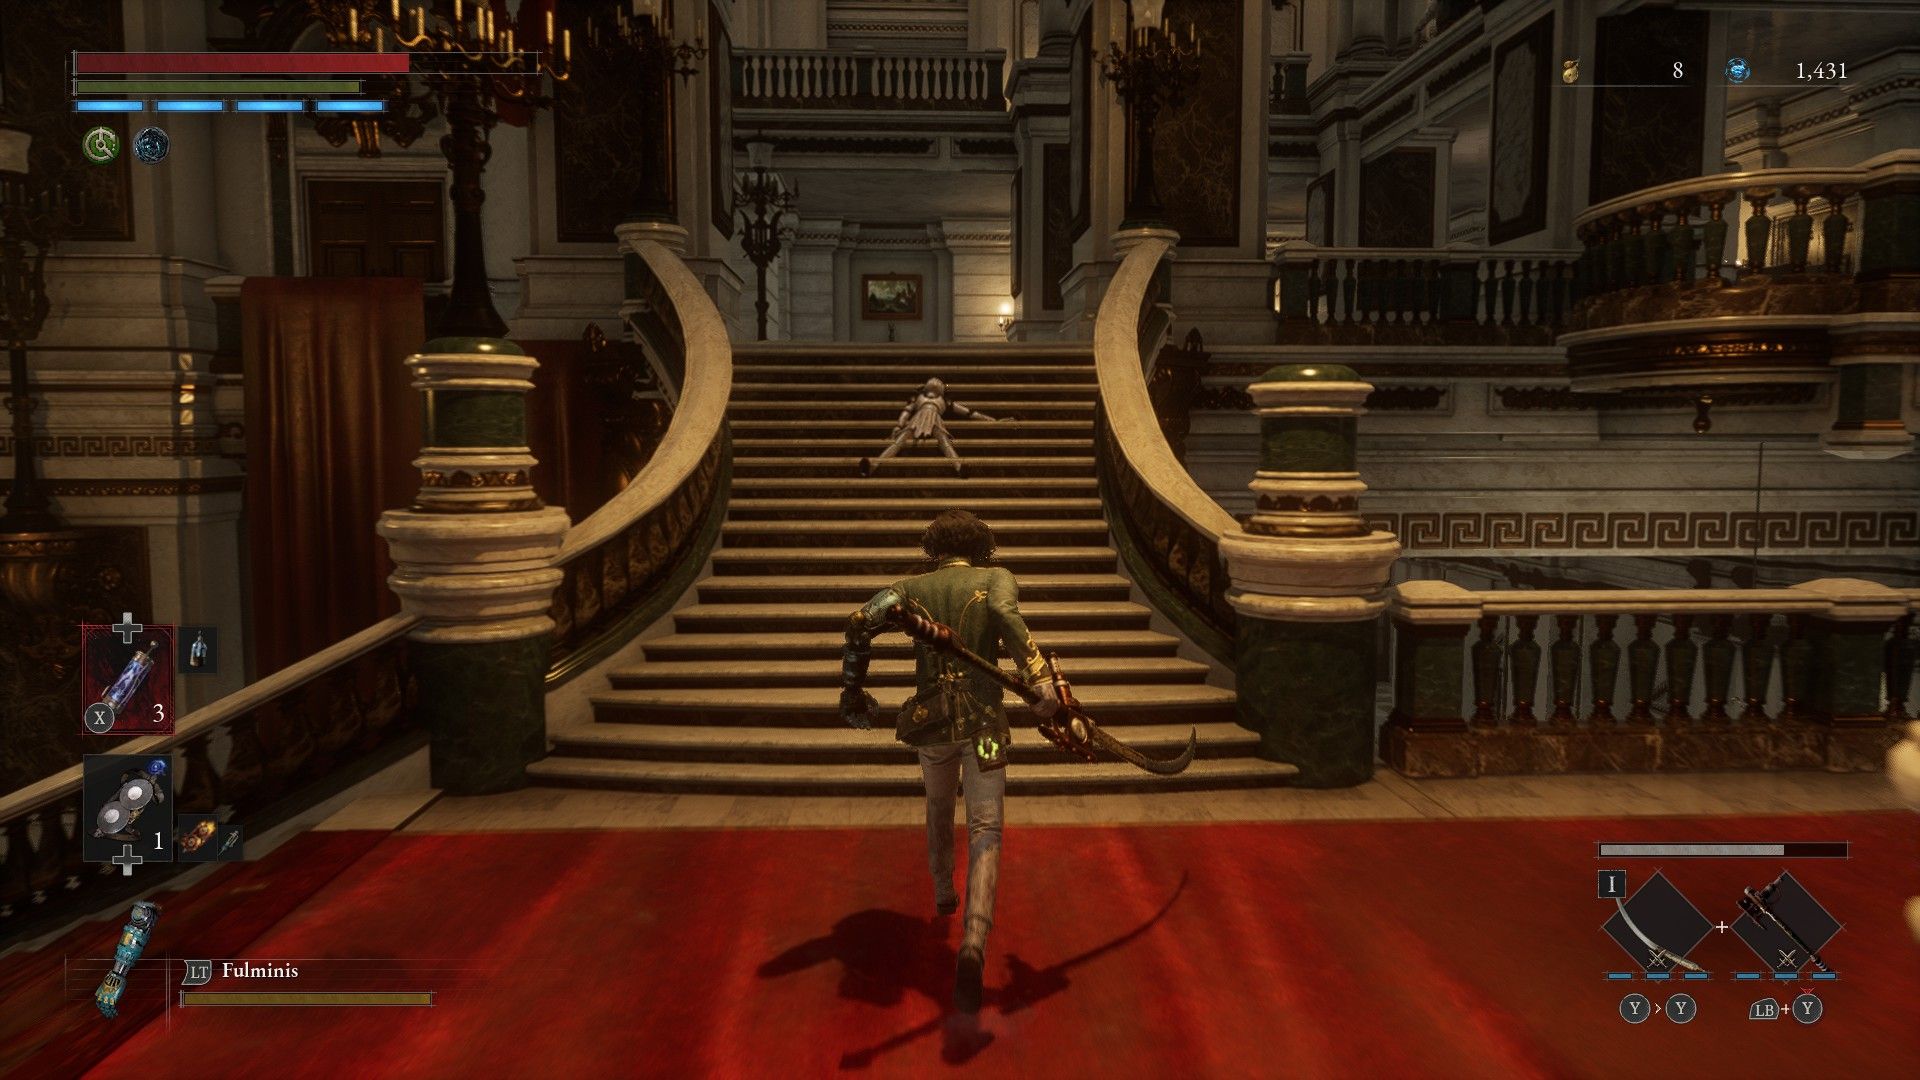 P climbs stairs to enter left wing of the opera house in Lies of P